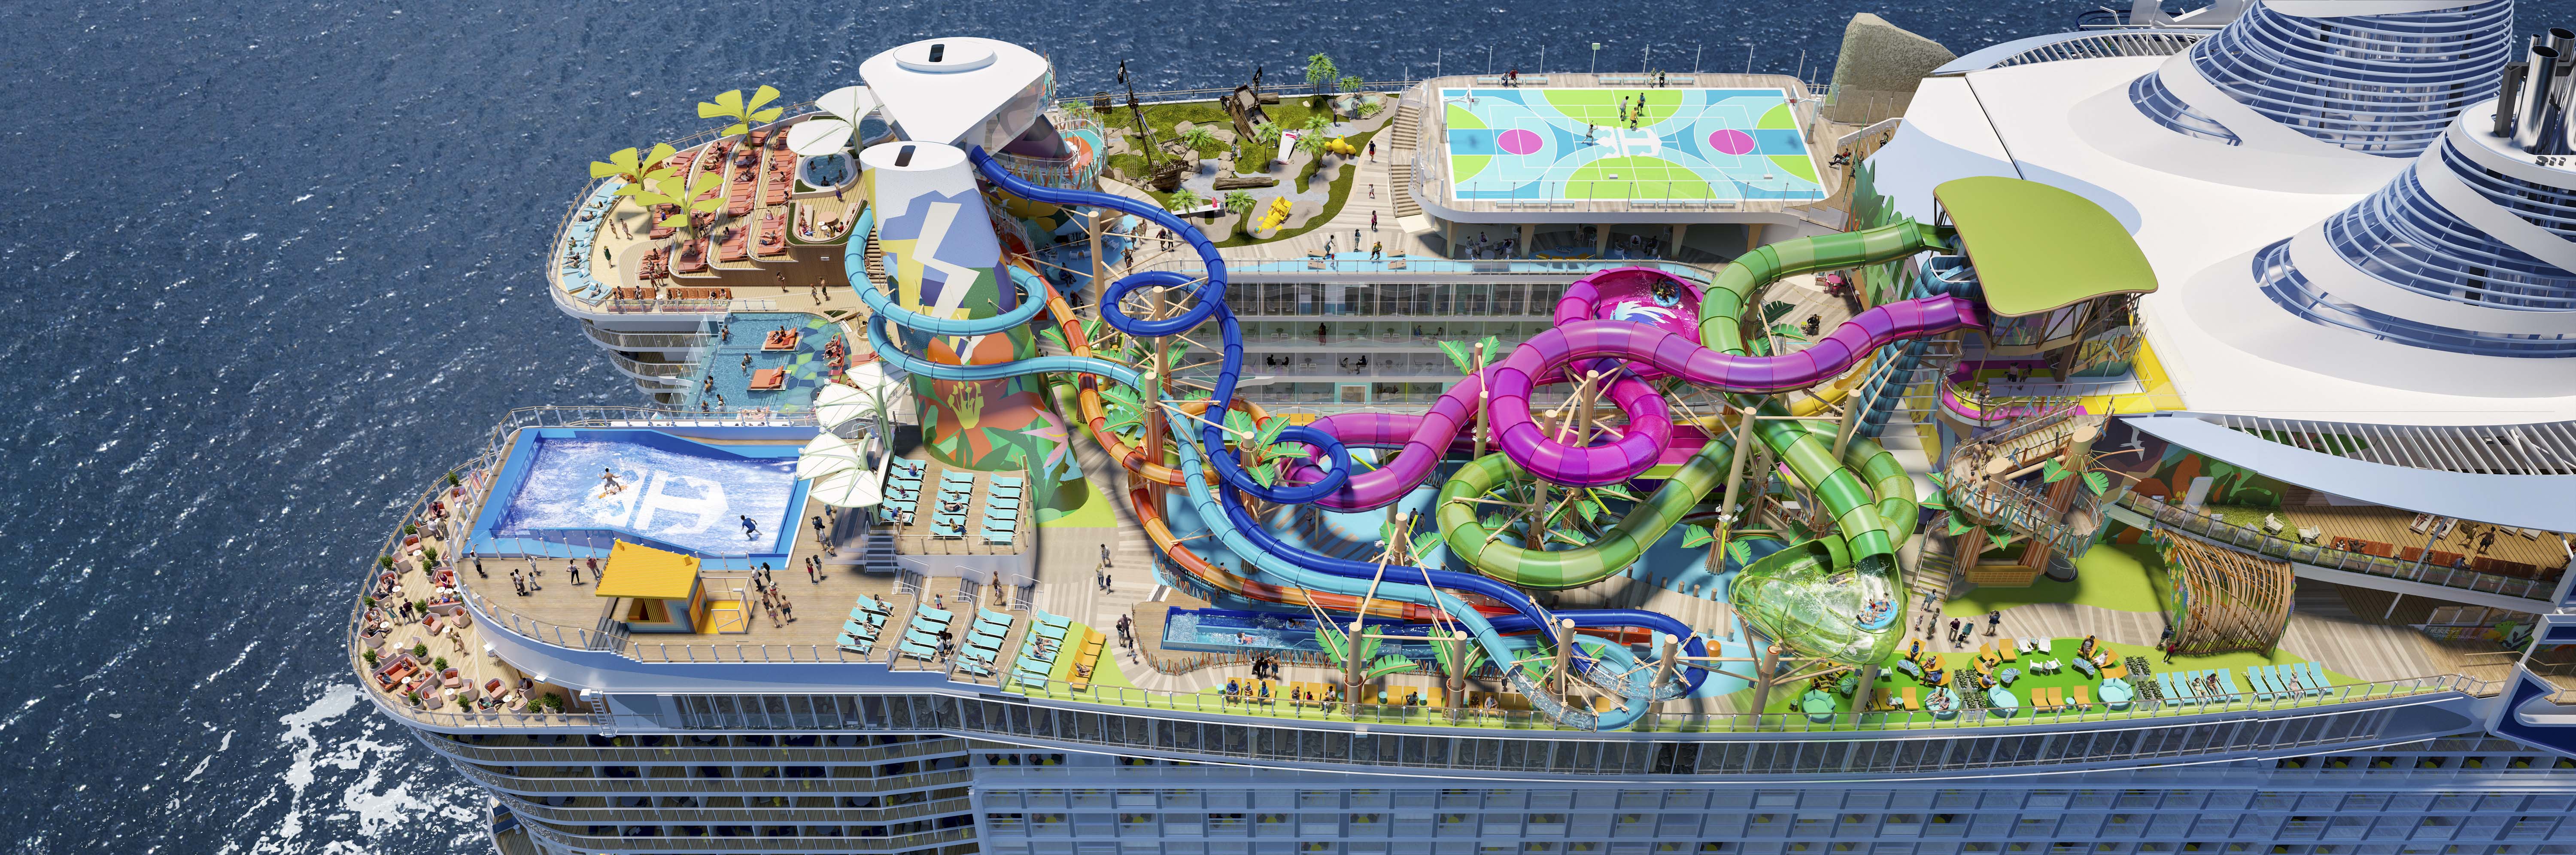 The New 'Icon of the Seas' Will Have a 55-foot Waterfall, the